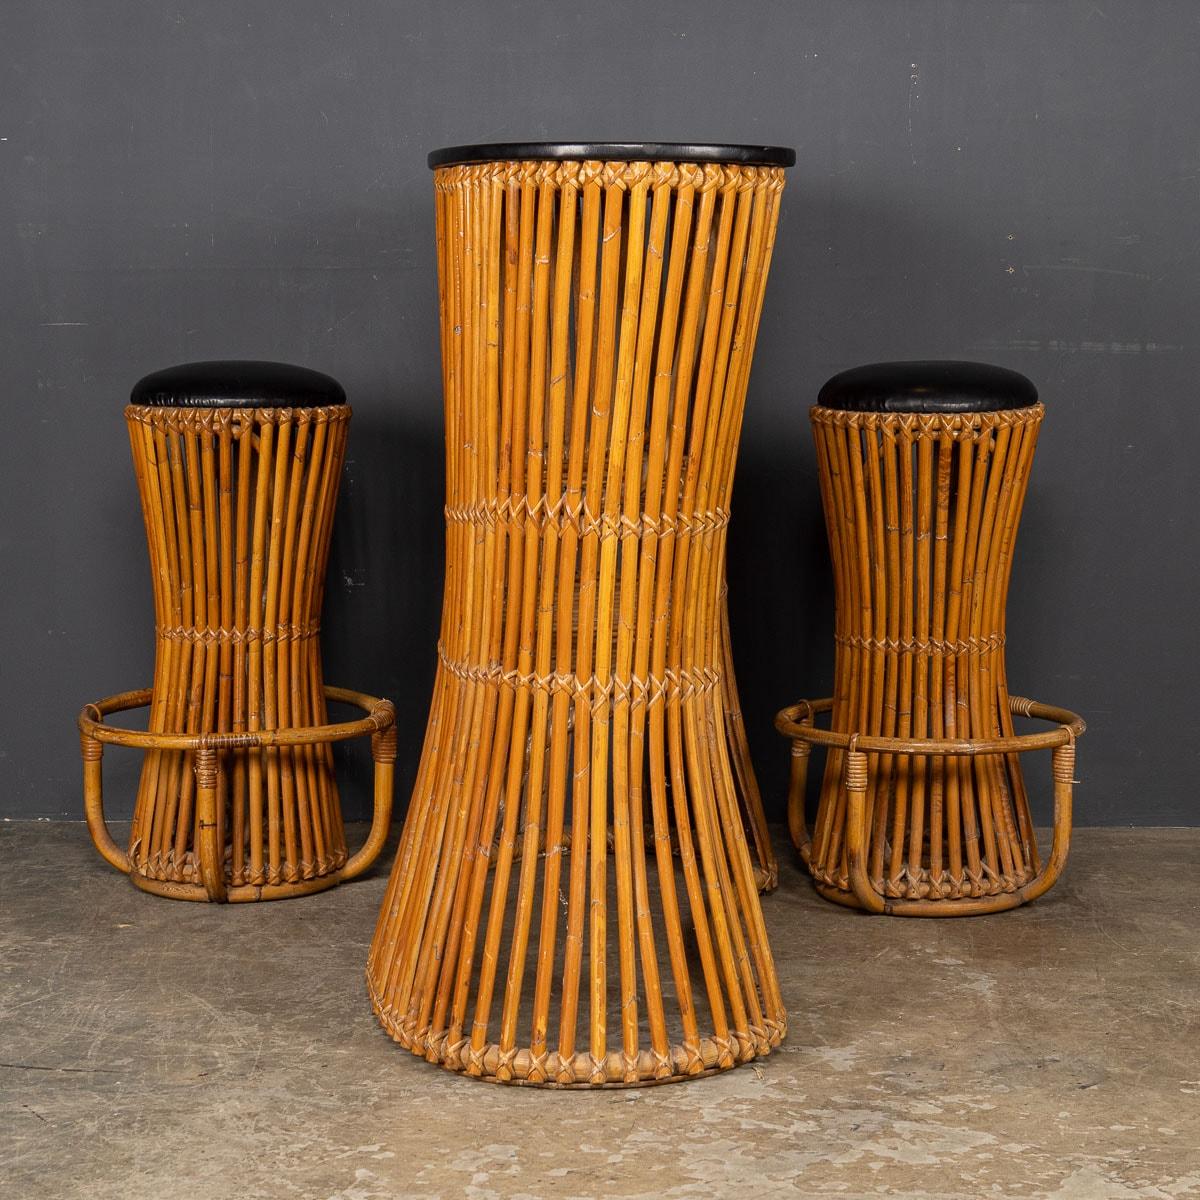 20th Century Italian Standing Bamboo Dry Bar & Stools, c.1960 For Sale 1